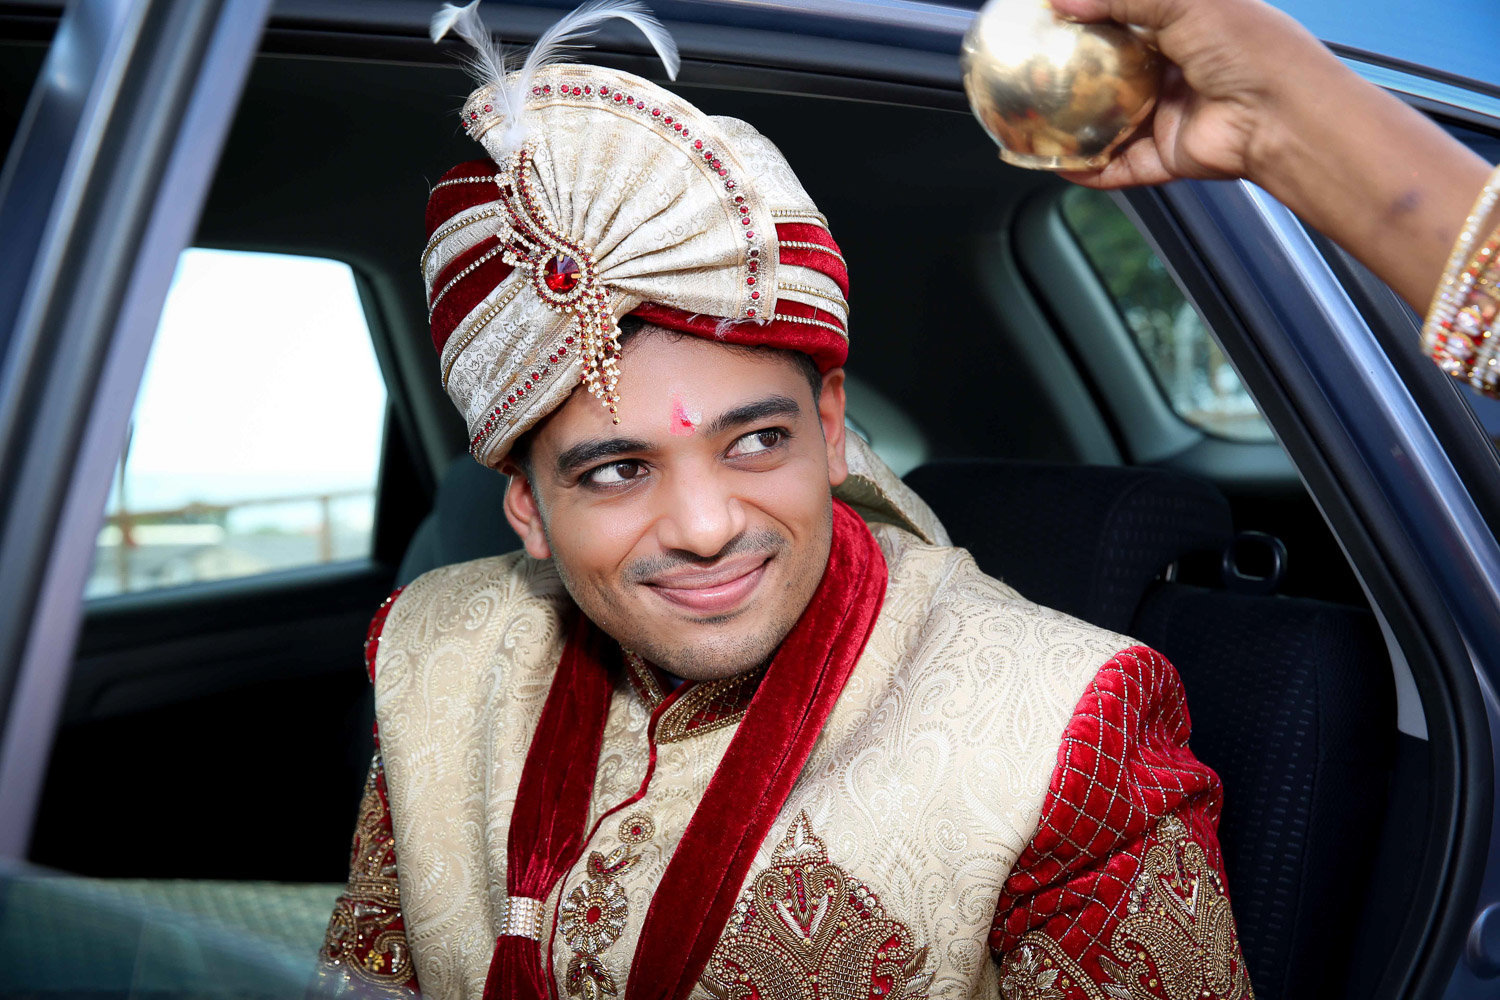 Indian groom receives blessing while coming out of car. Photo by Ross Photography, Trinidad, W.I..